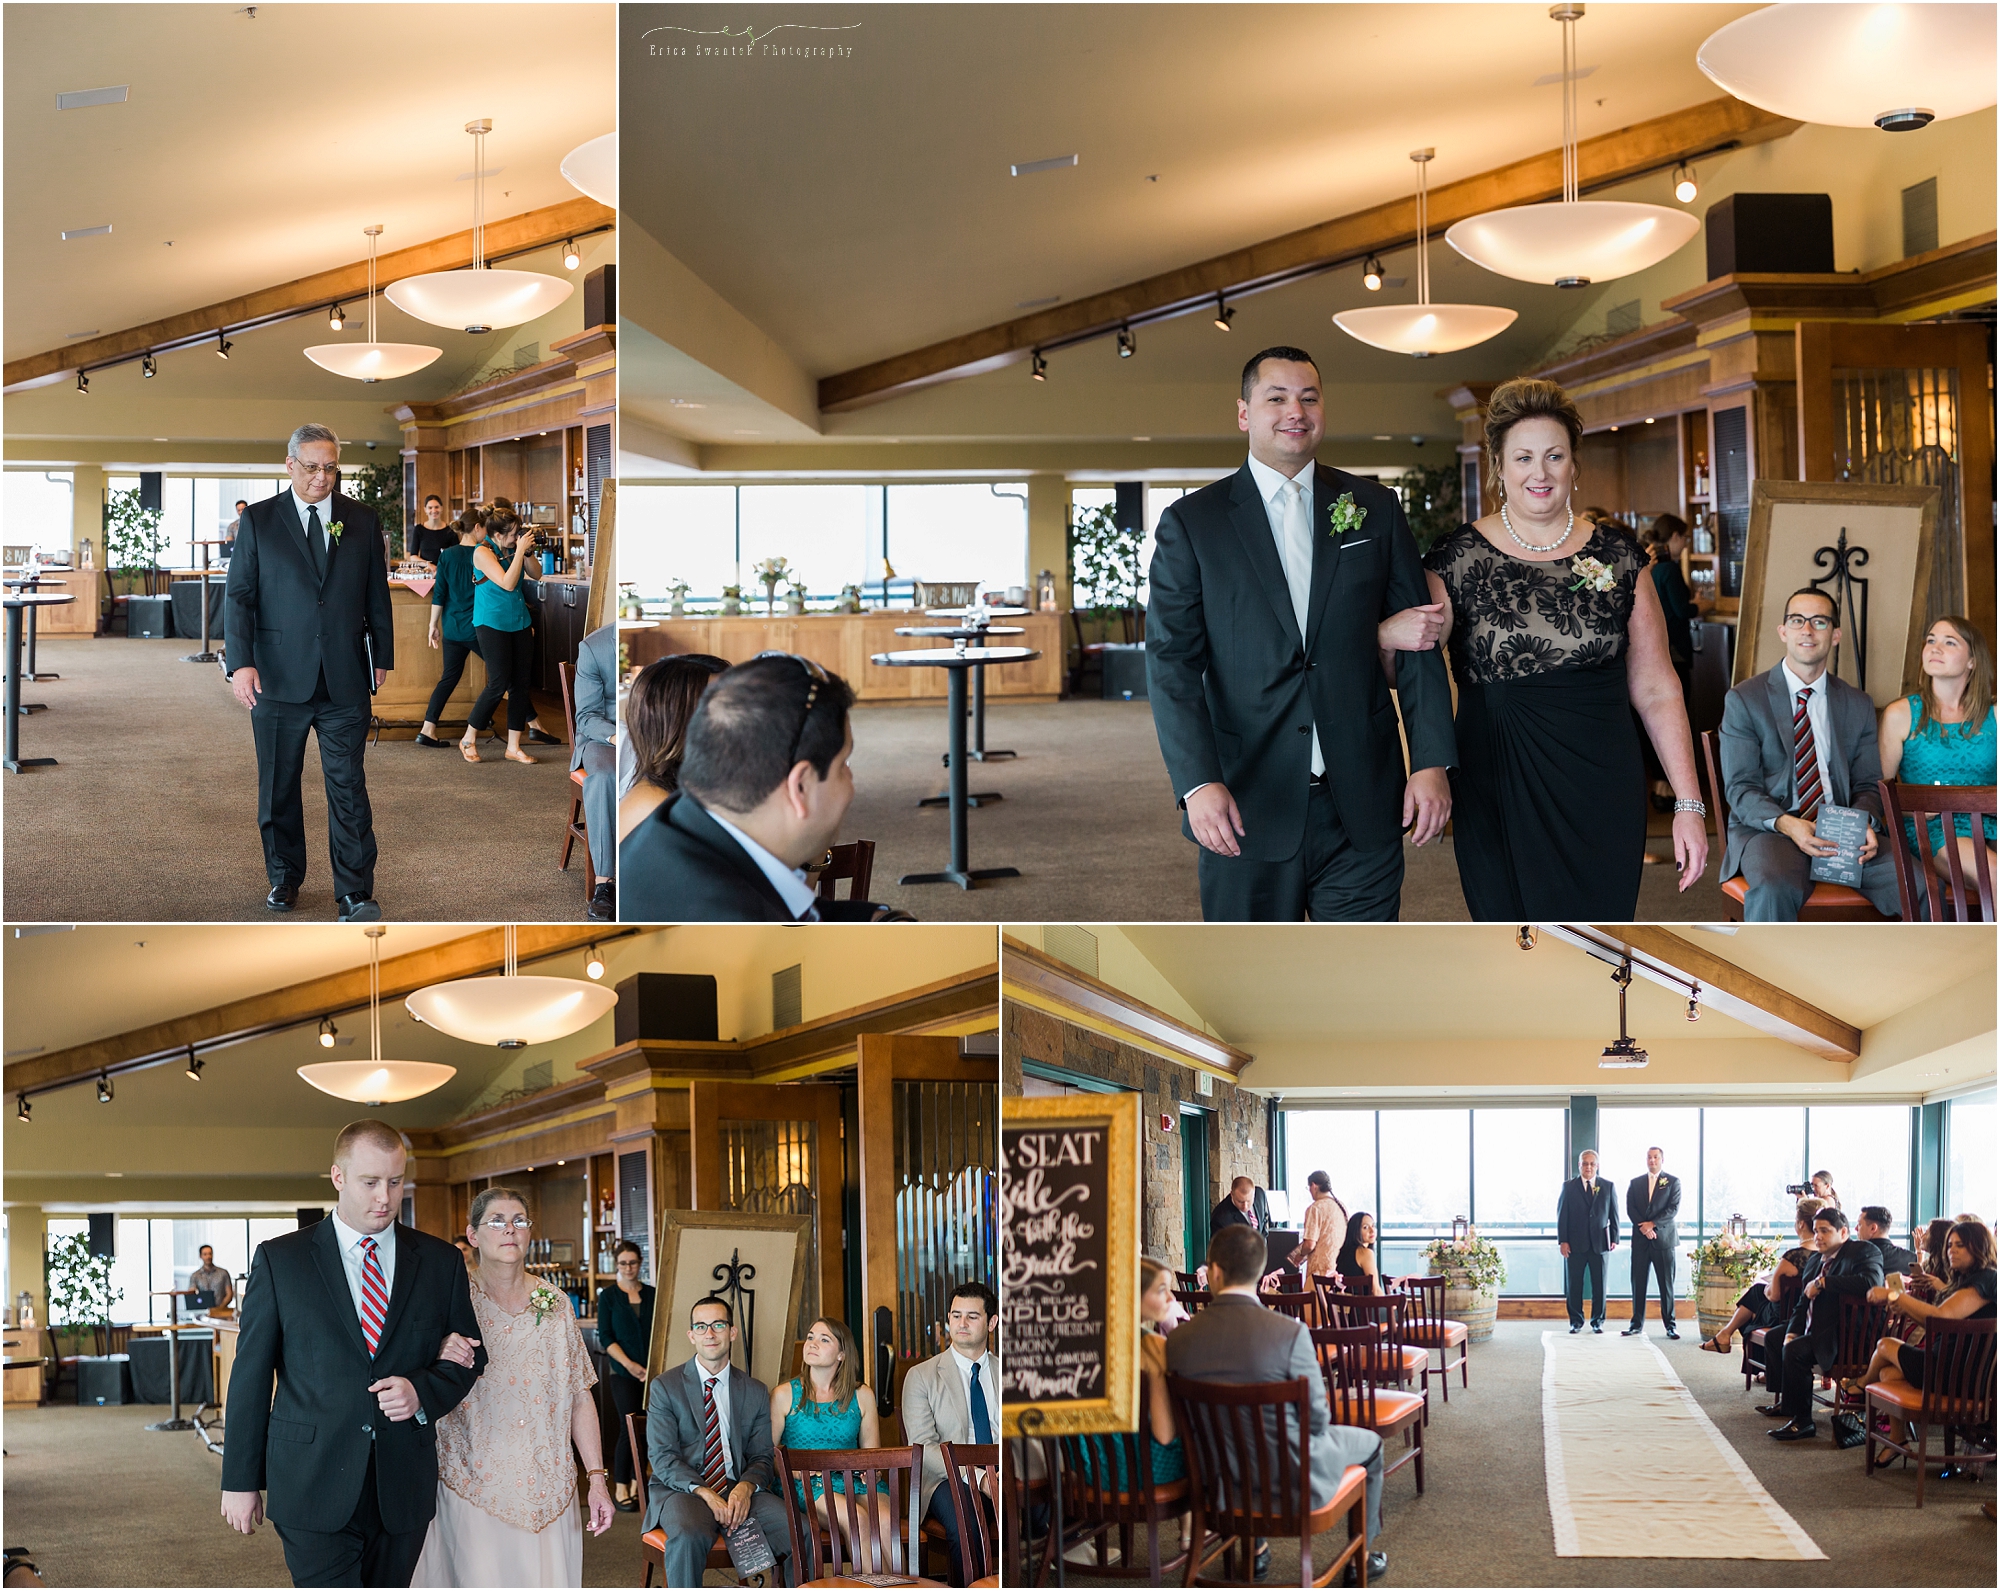 Deschutes Brewery Wedding ceremony at the Mountain Room wedding venue in Bend, OR. | Erica Swantek Photography